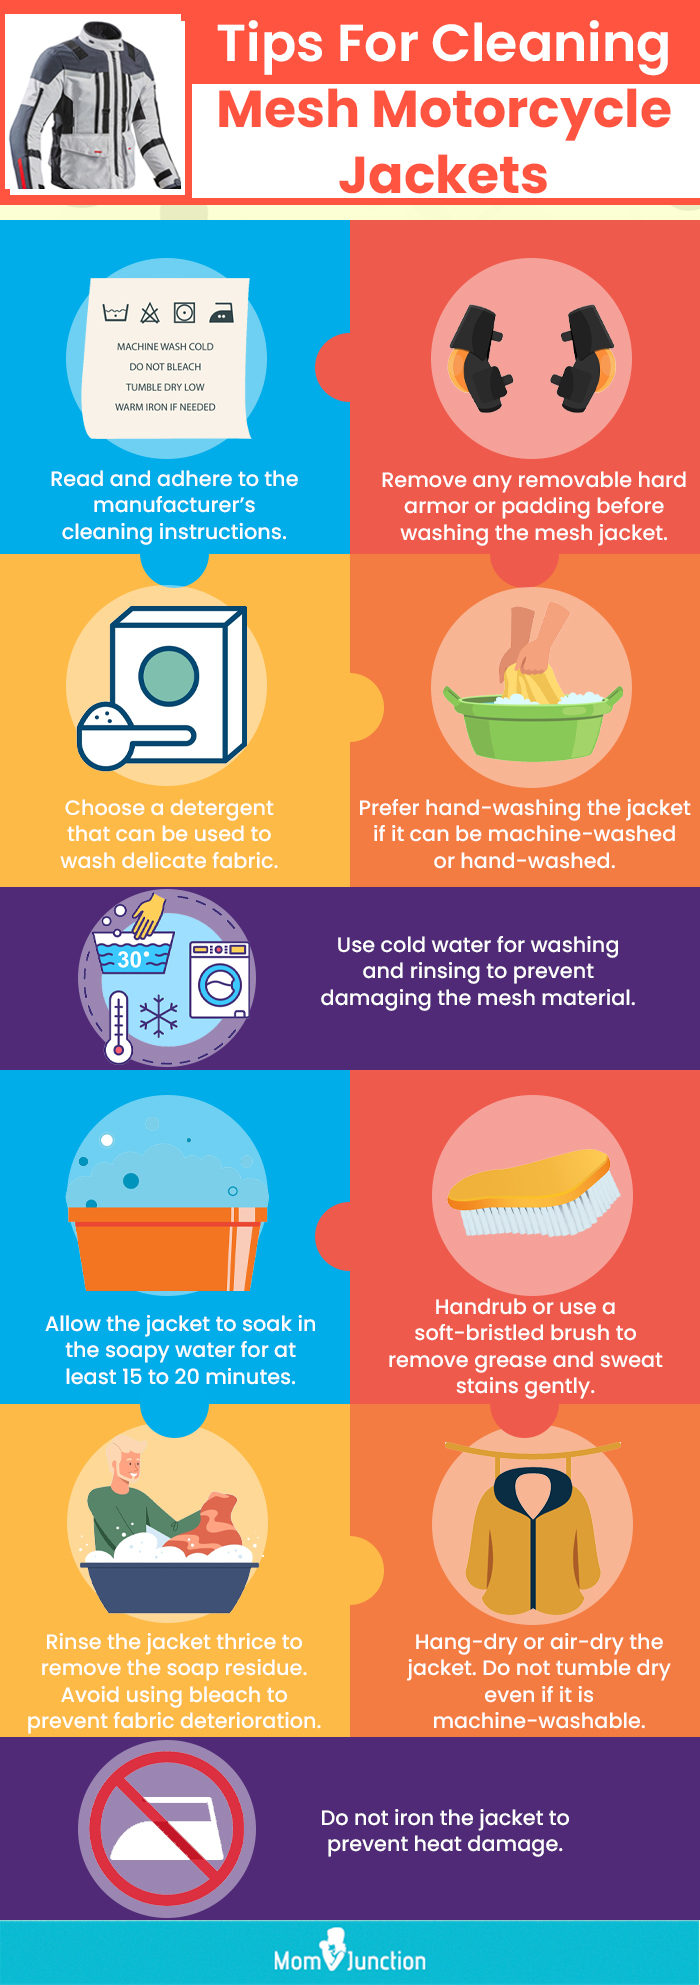 Tips For Cleaning Mesh Motorcycle Jackets. (infographic)